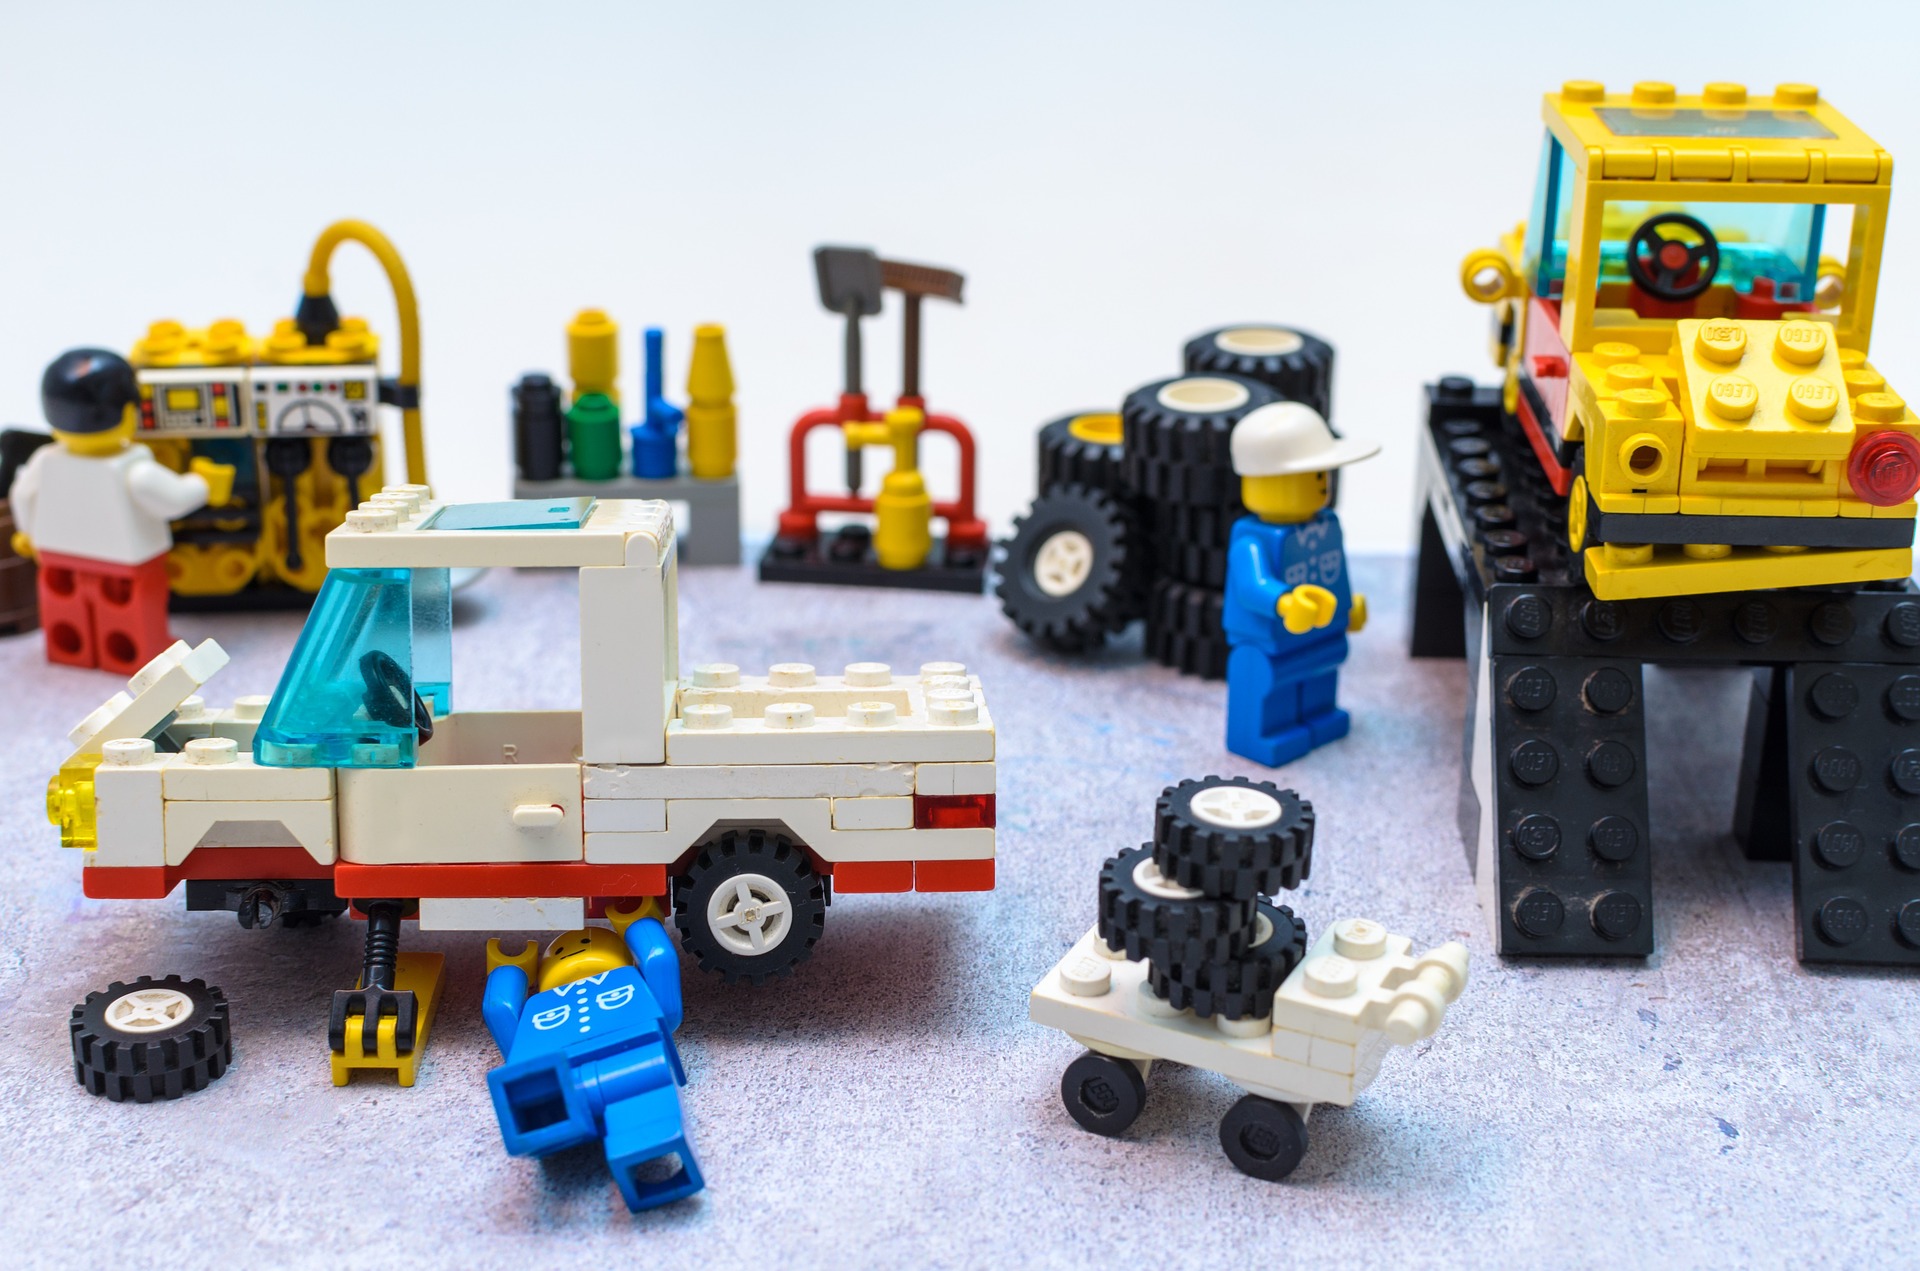 A variety of cars and trucks made out of LEGO bricks.